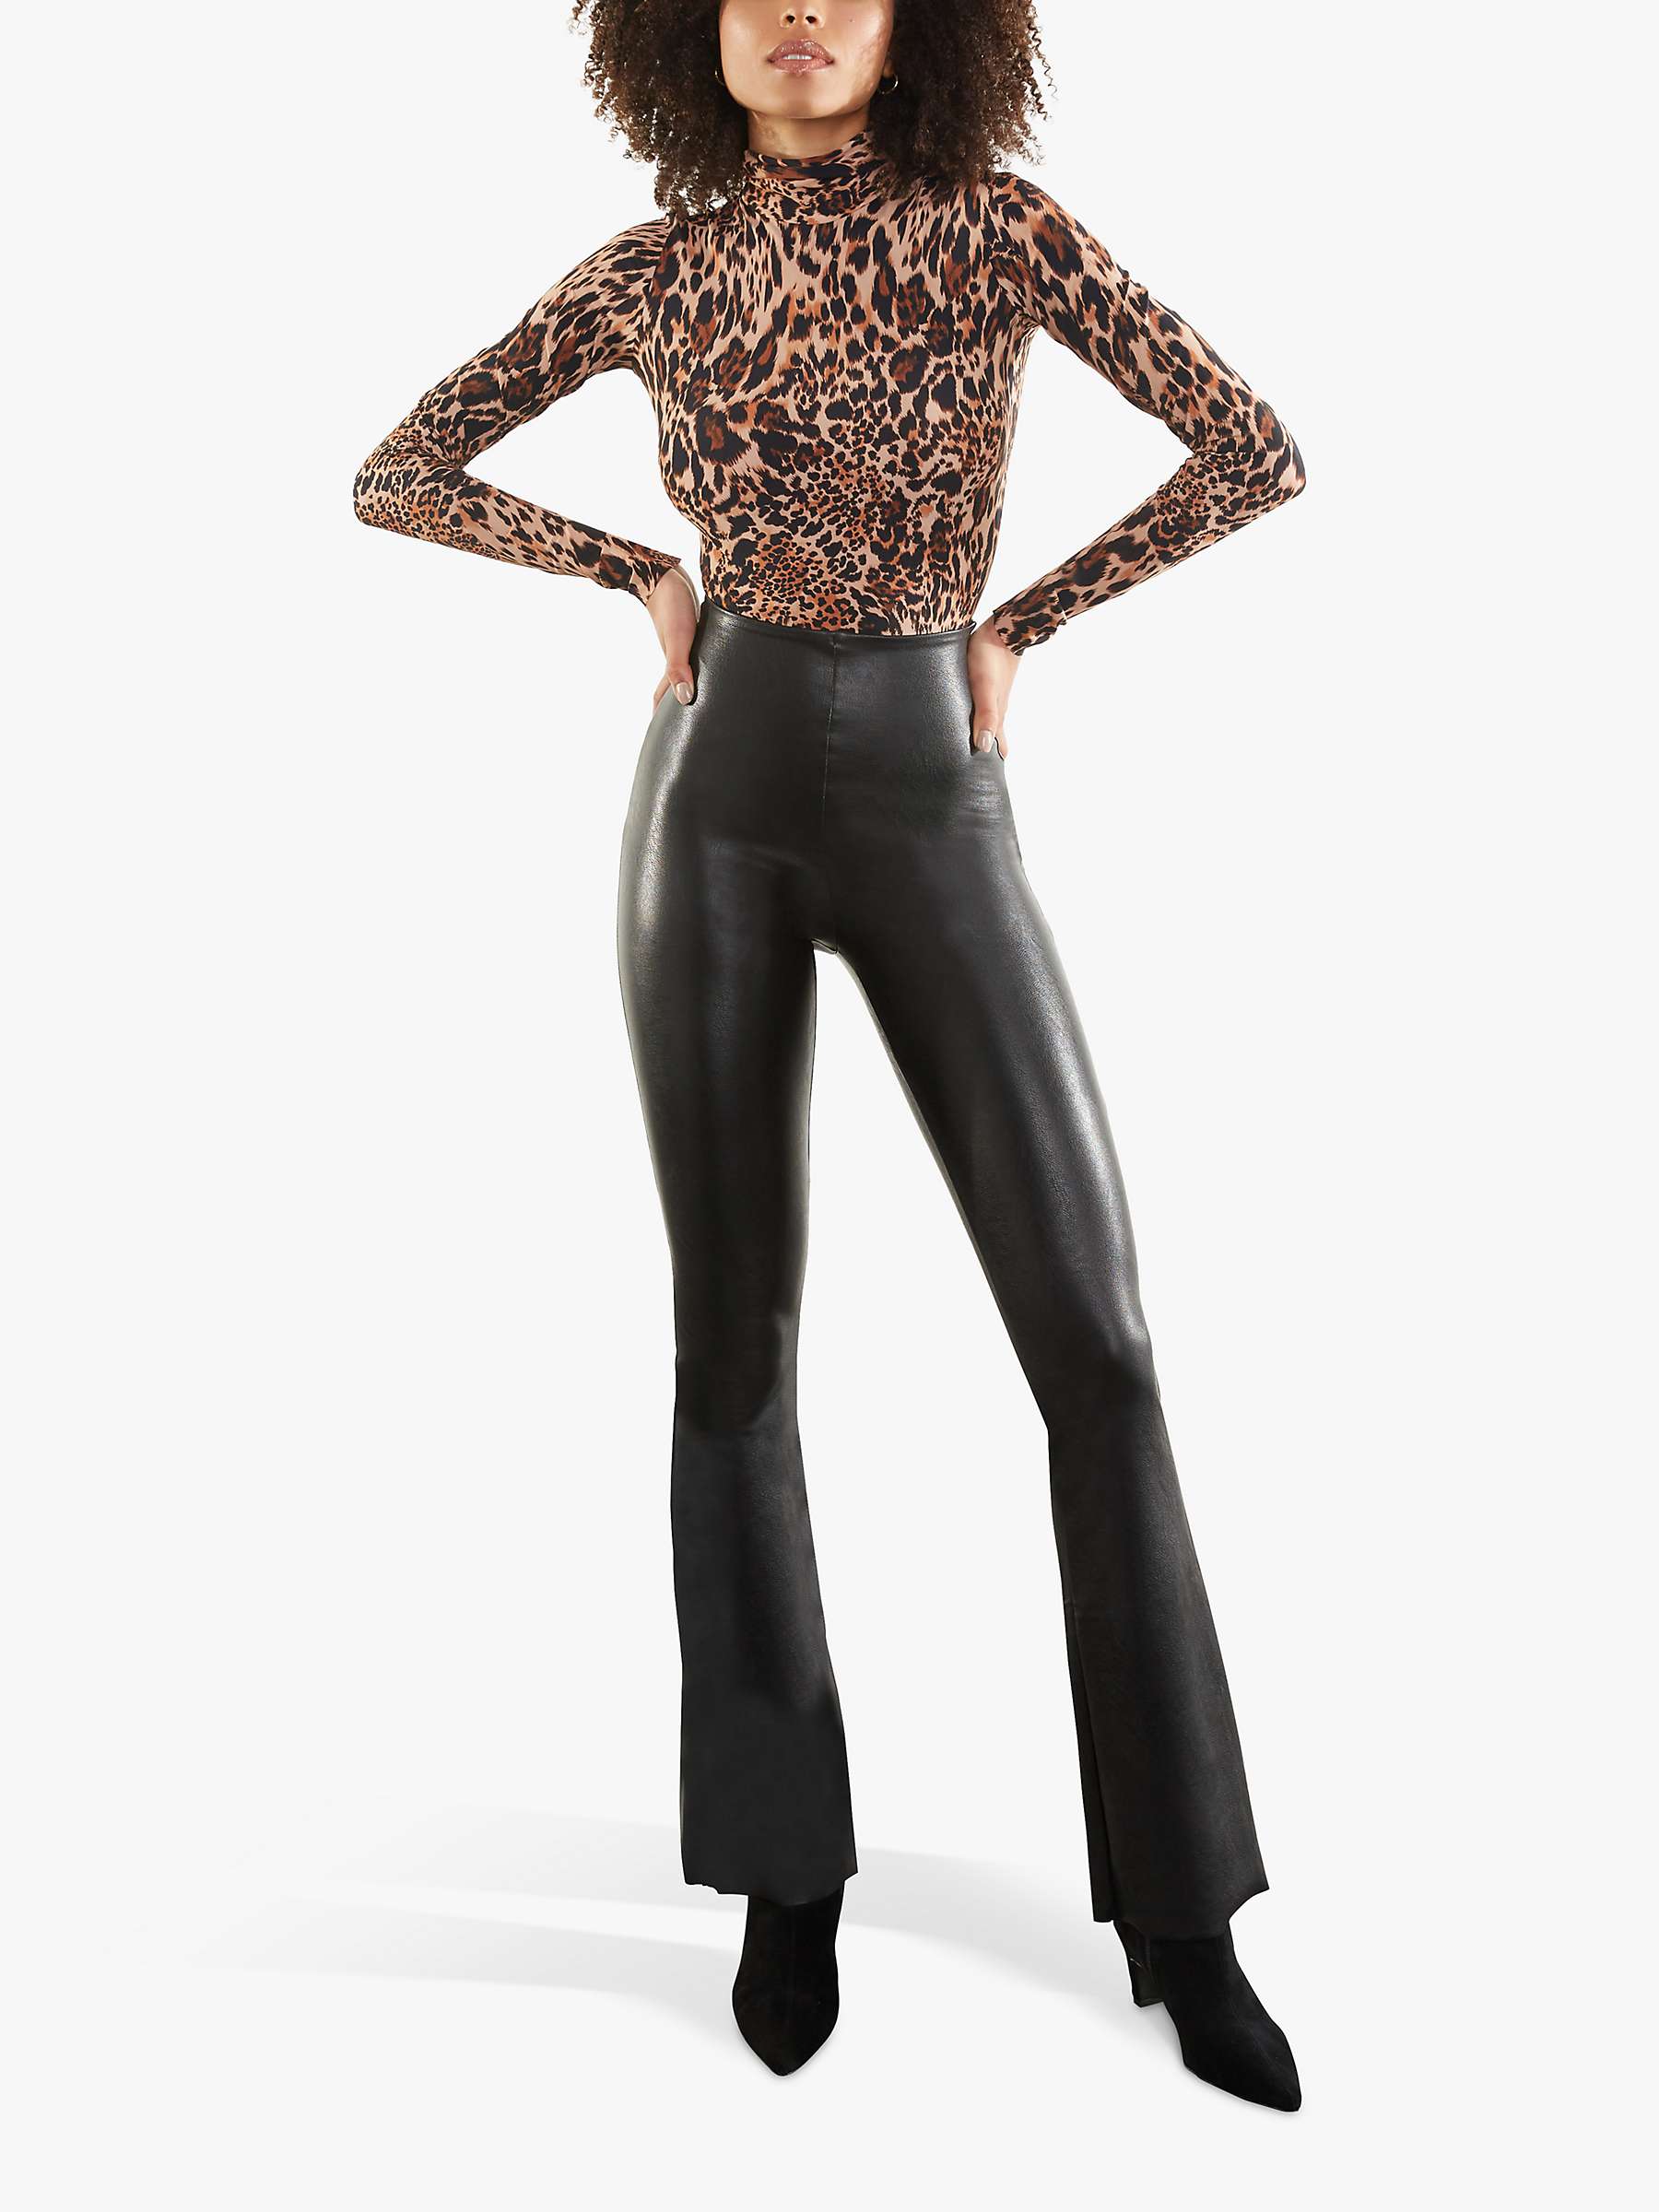 Buy Commando Faux Leather Smoothing Flare Leggings, Black Online at johnlewis.com